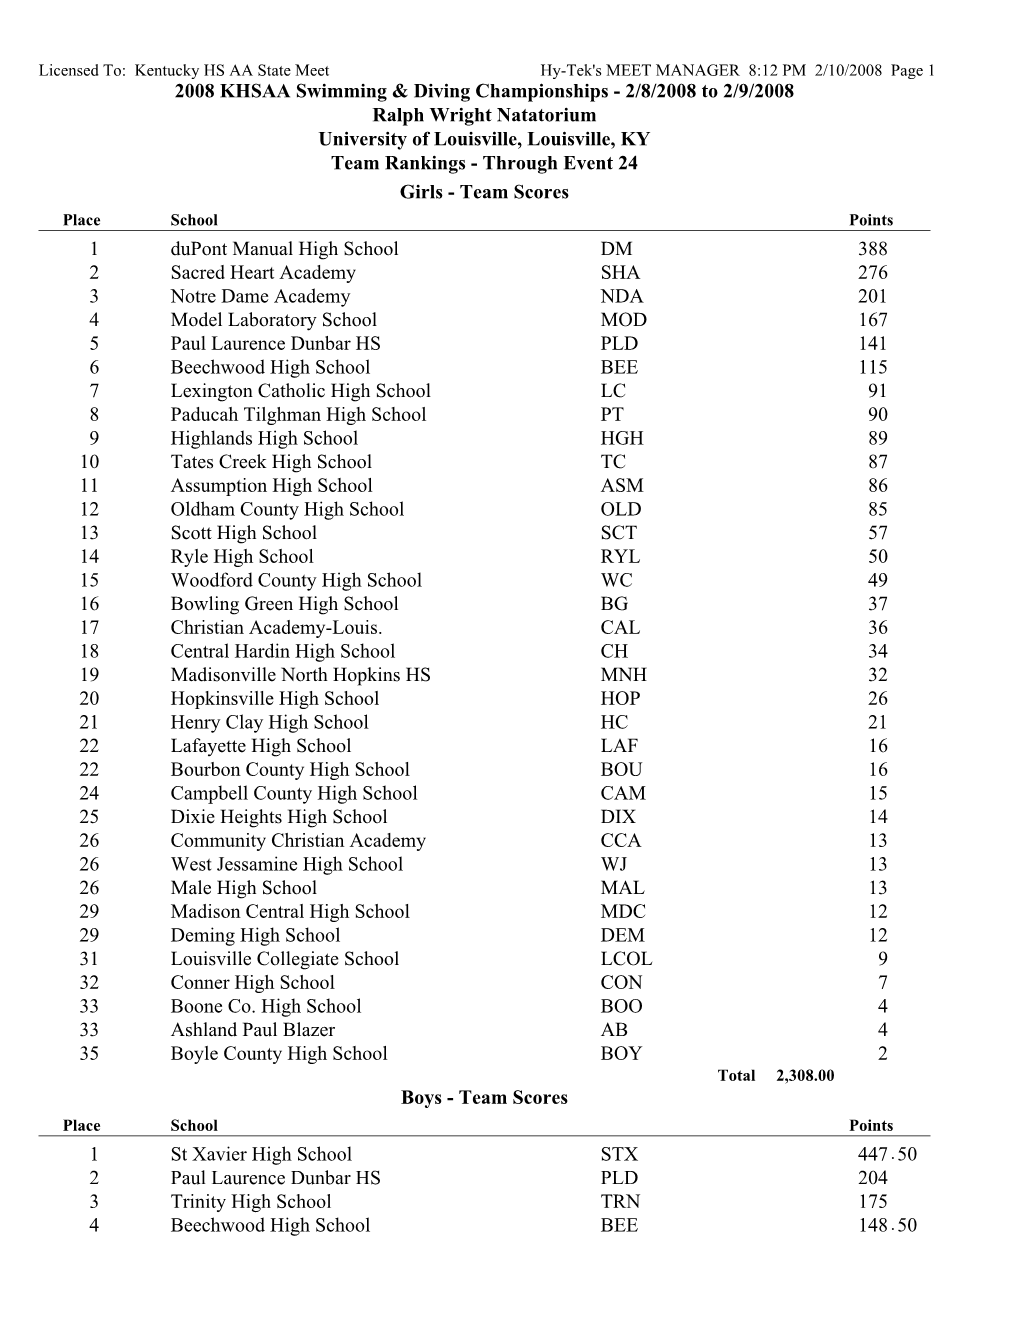 2008 Complete Meet Results